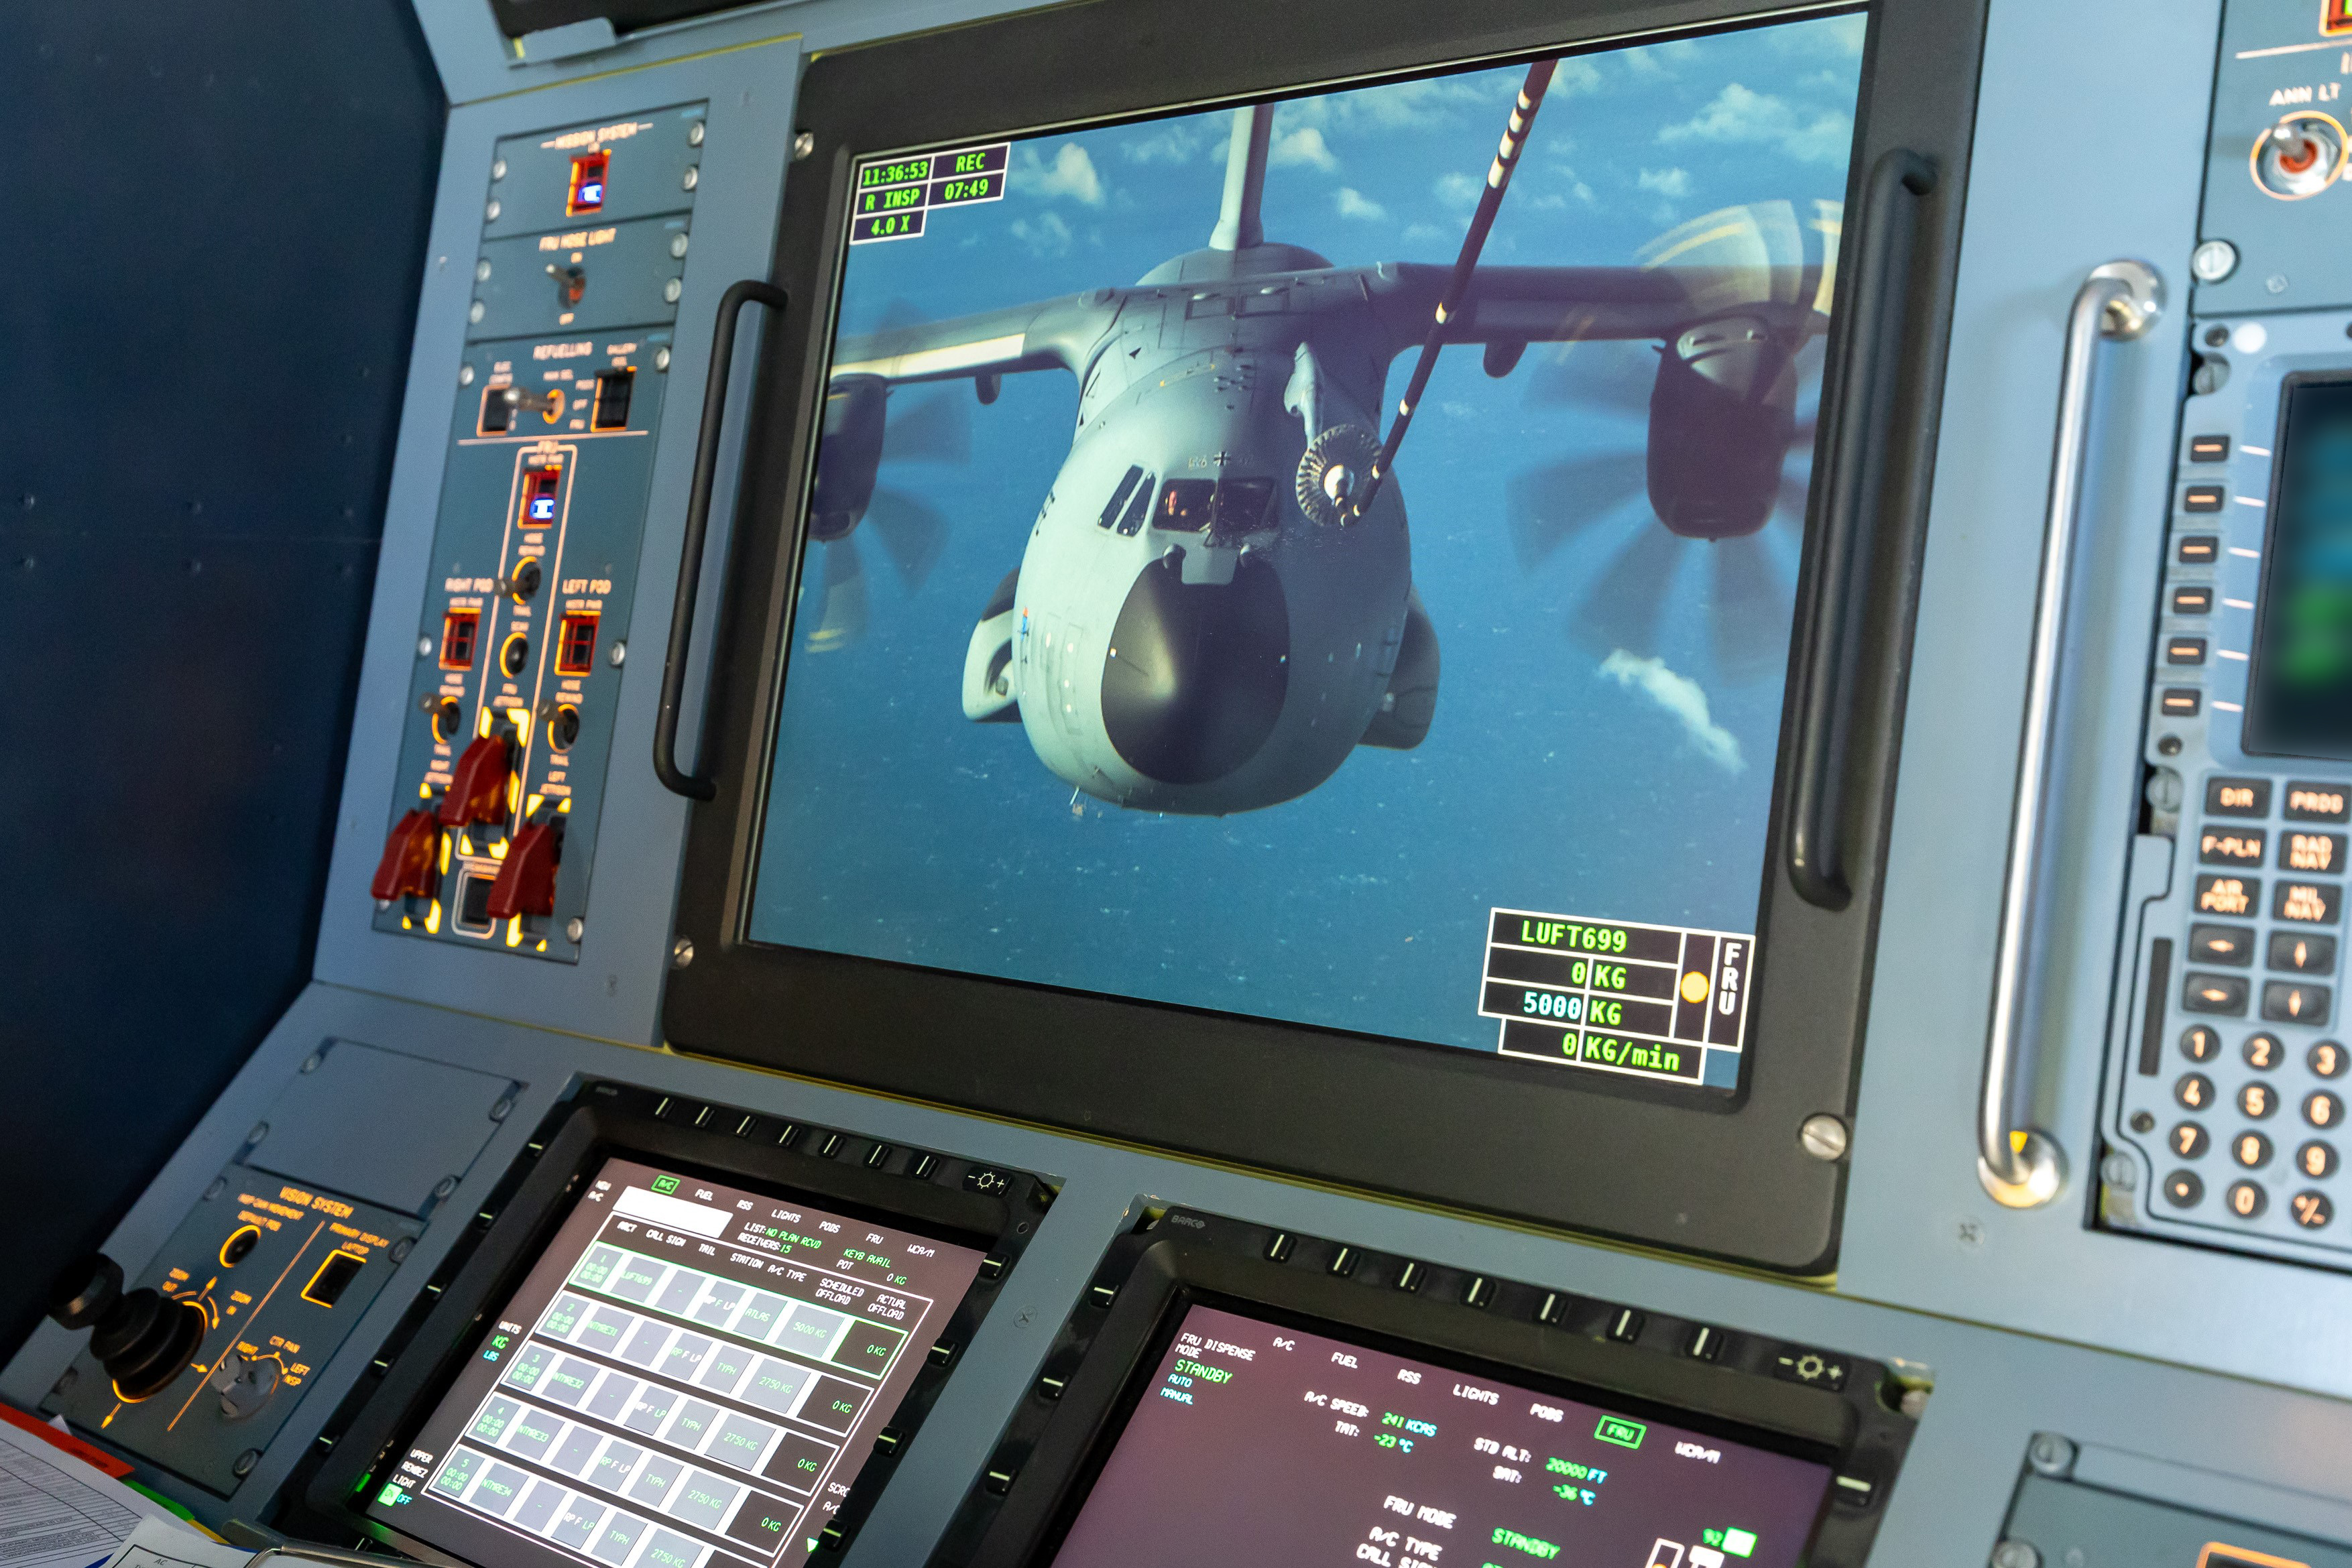 Photo - RAF Voyager AAR Station and Operating aircrew, German A400M shown in video monitor receiving fuel.